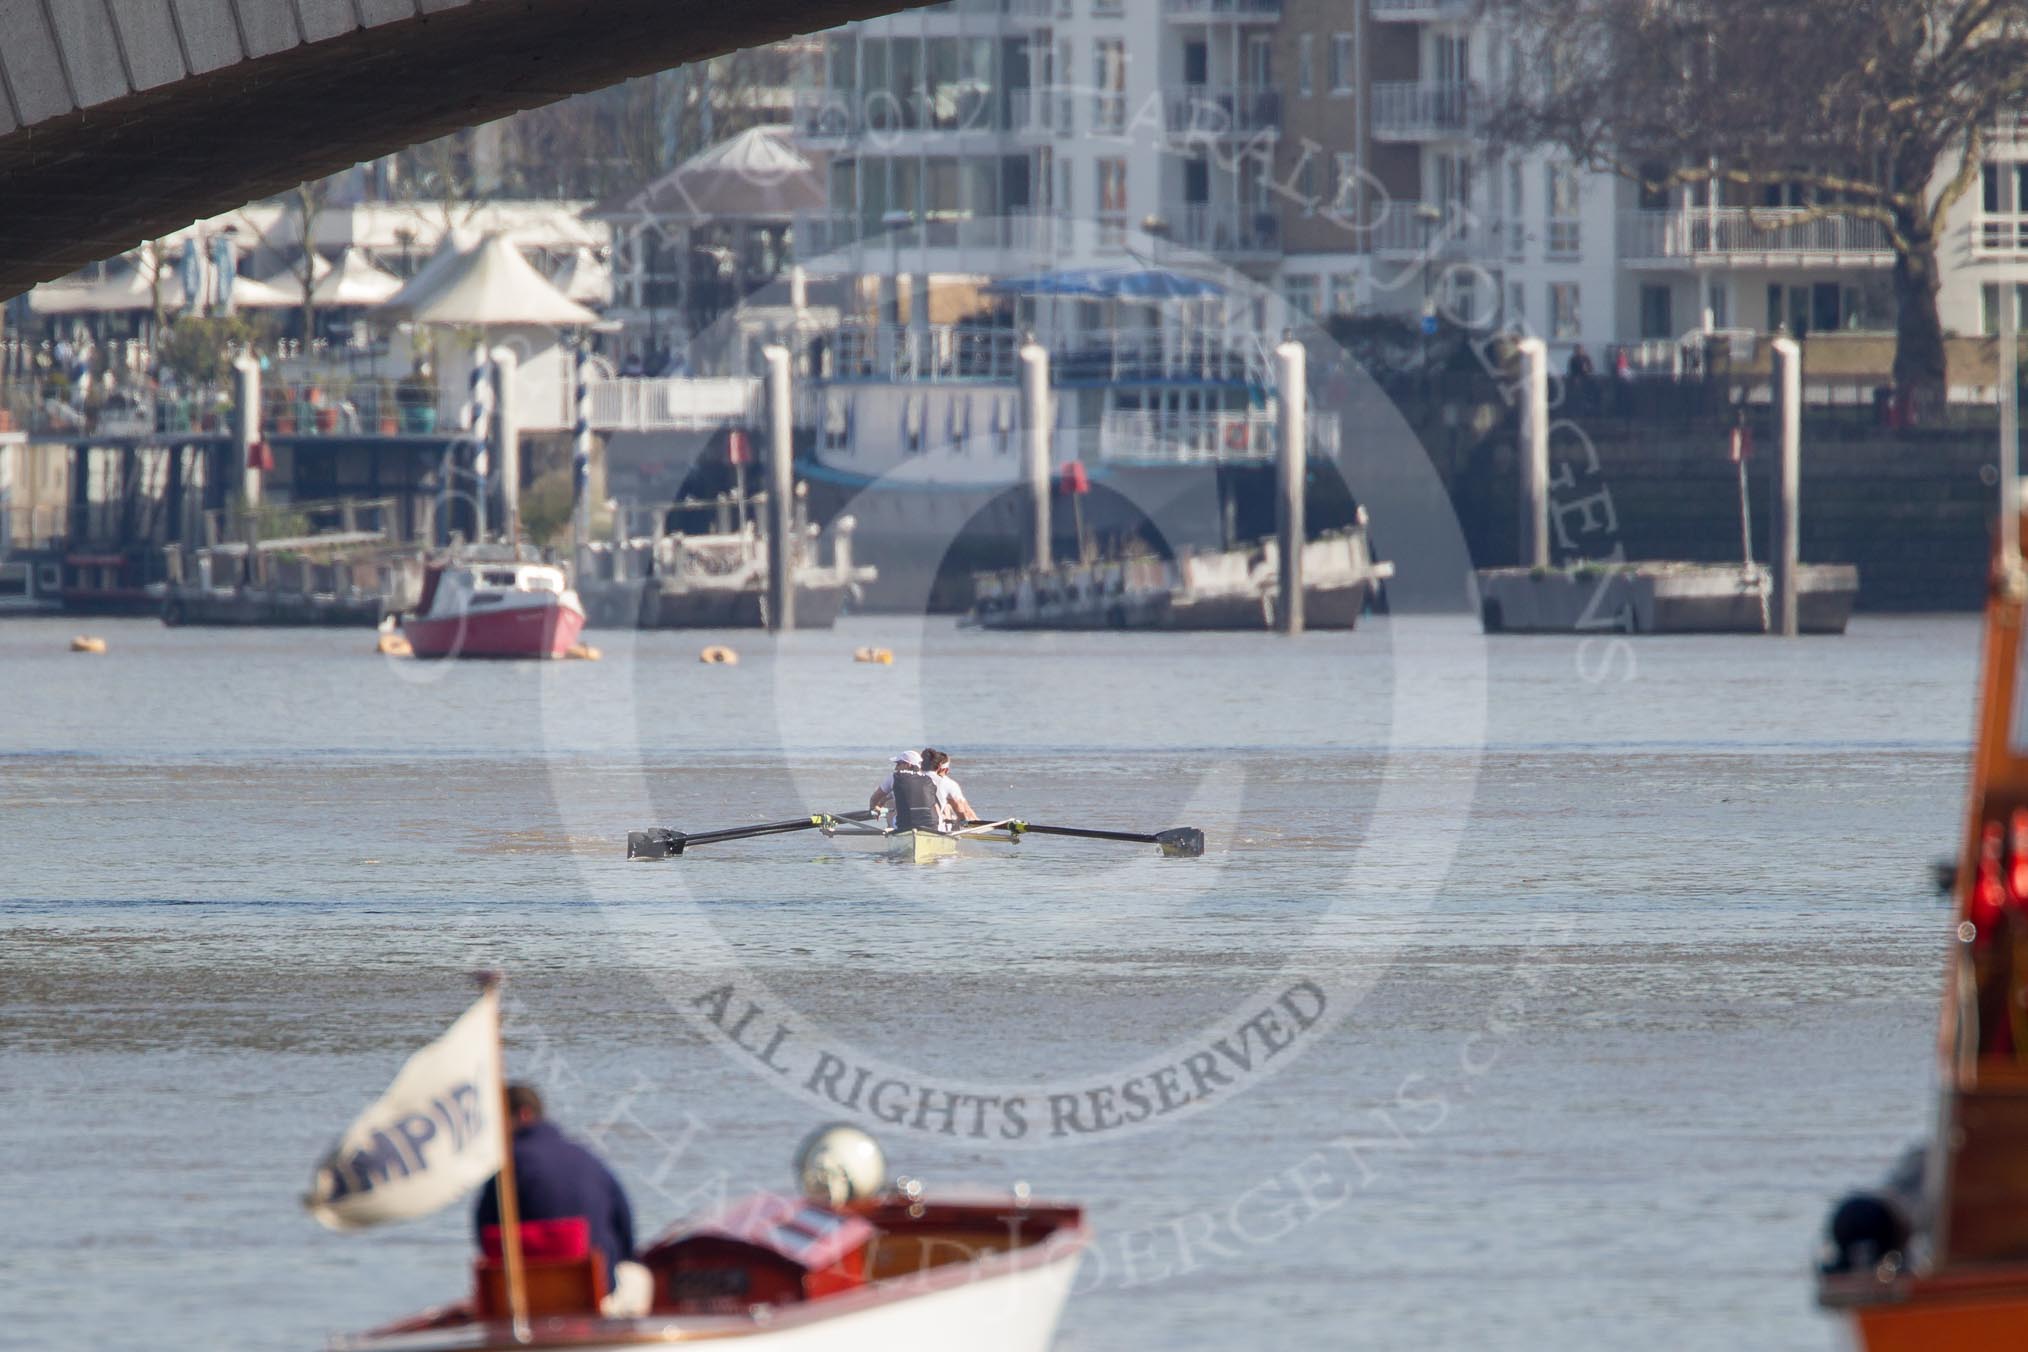 The Boat Race season 2012 - fixture CUBC vs Molesey BC.




on 25 March 2012 at 14:53, image #78